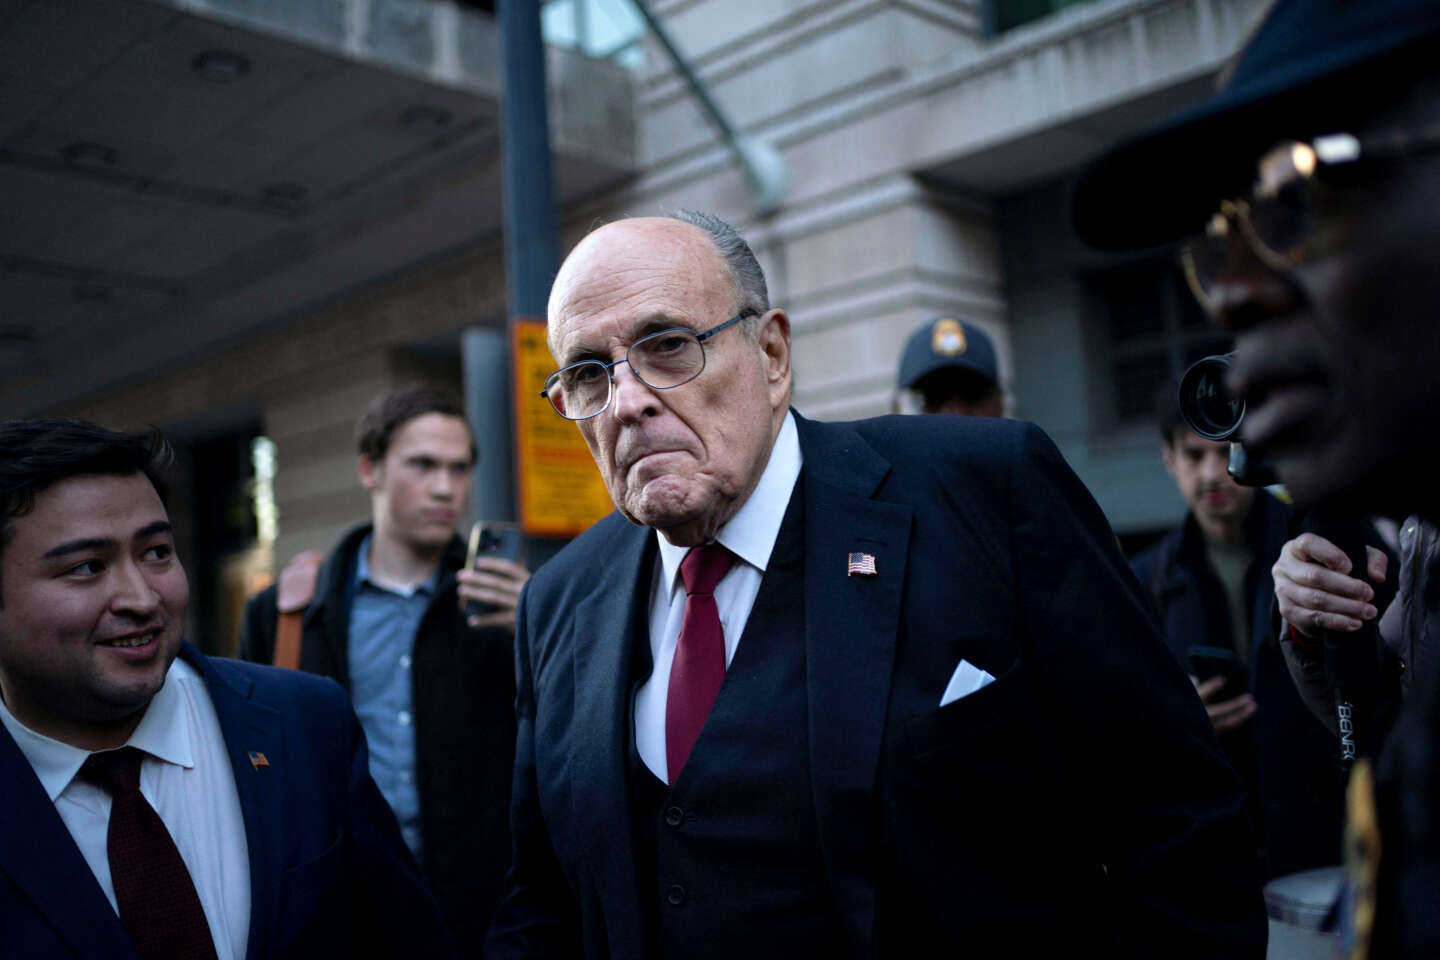 Donald Trump’s ex-lawyer Rudy Giuliani ordered to pay $148 million in defamation suit